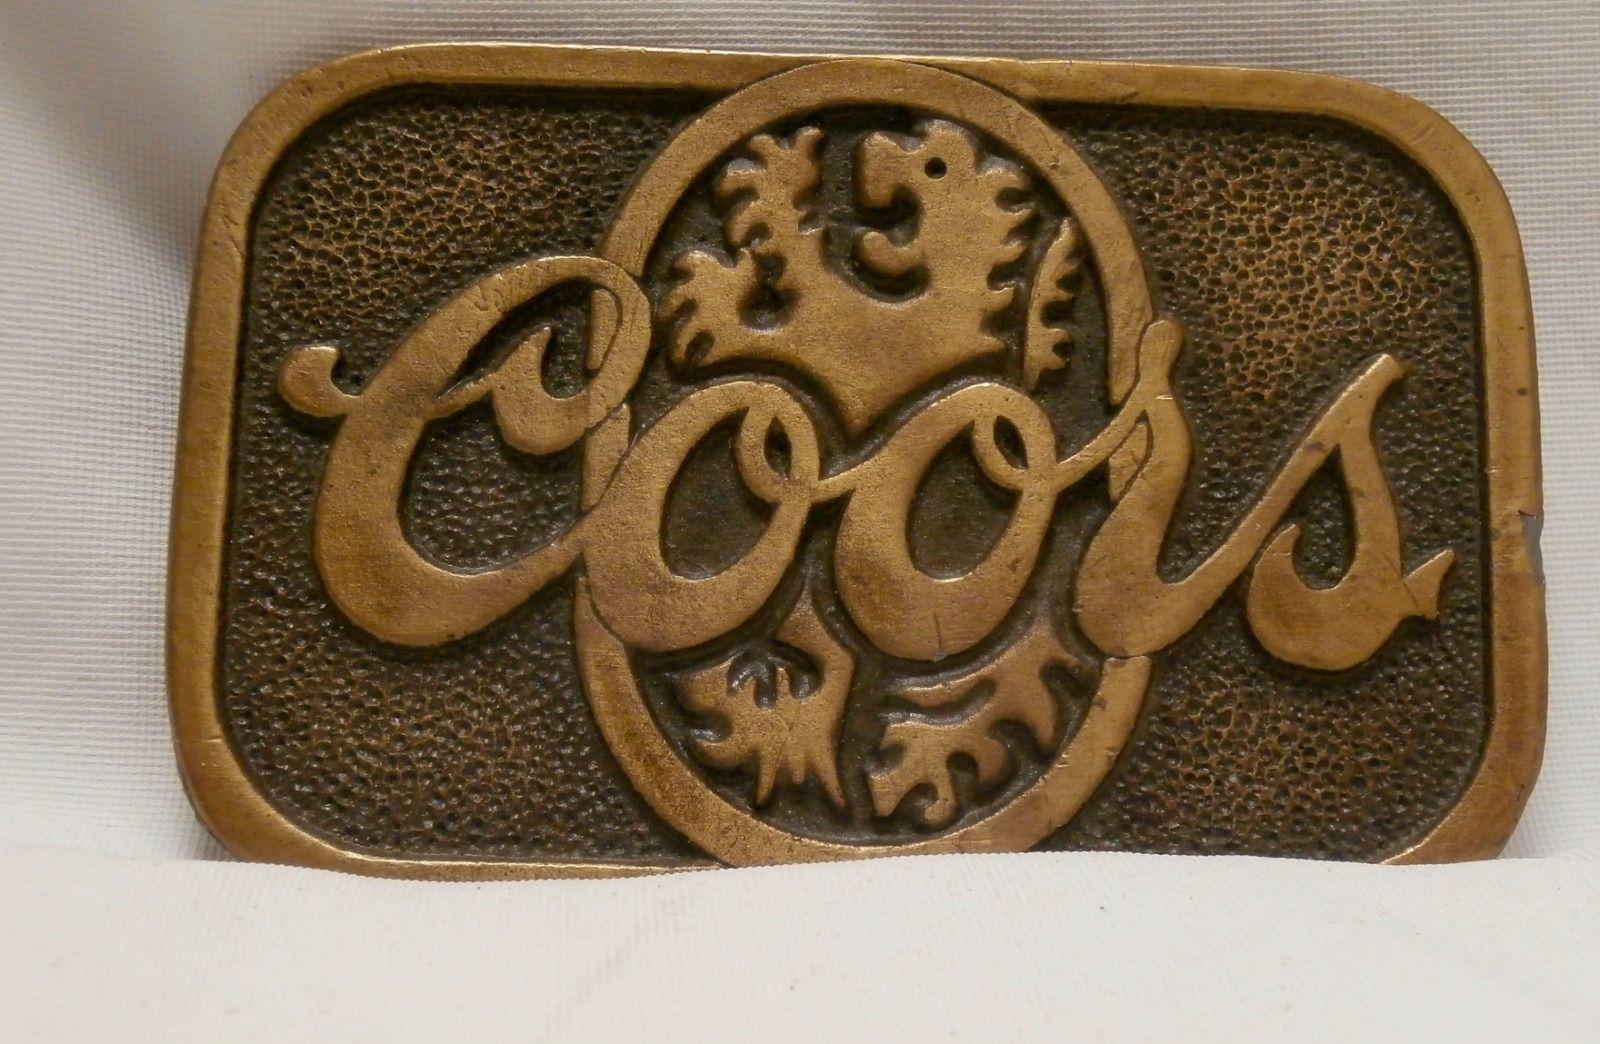 Coors Lion Logo - Vintage Coors Brewing Co Beer with Lion Logo Solid Metal Belt Buckle ...